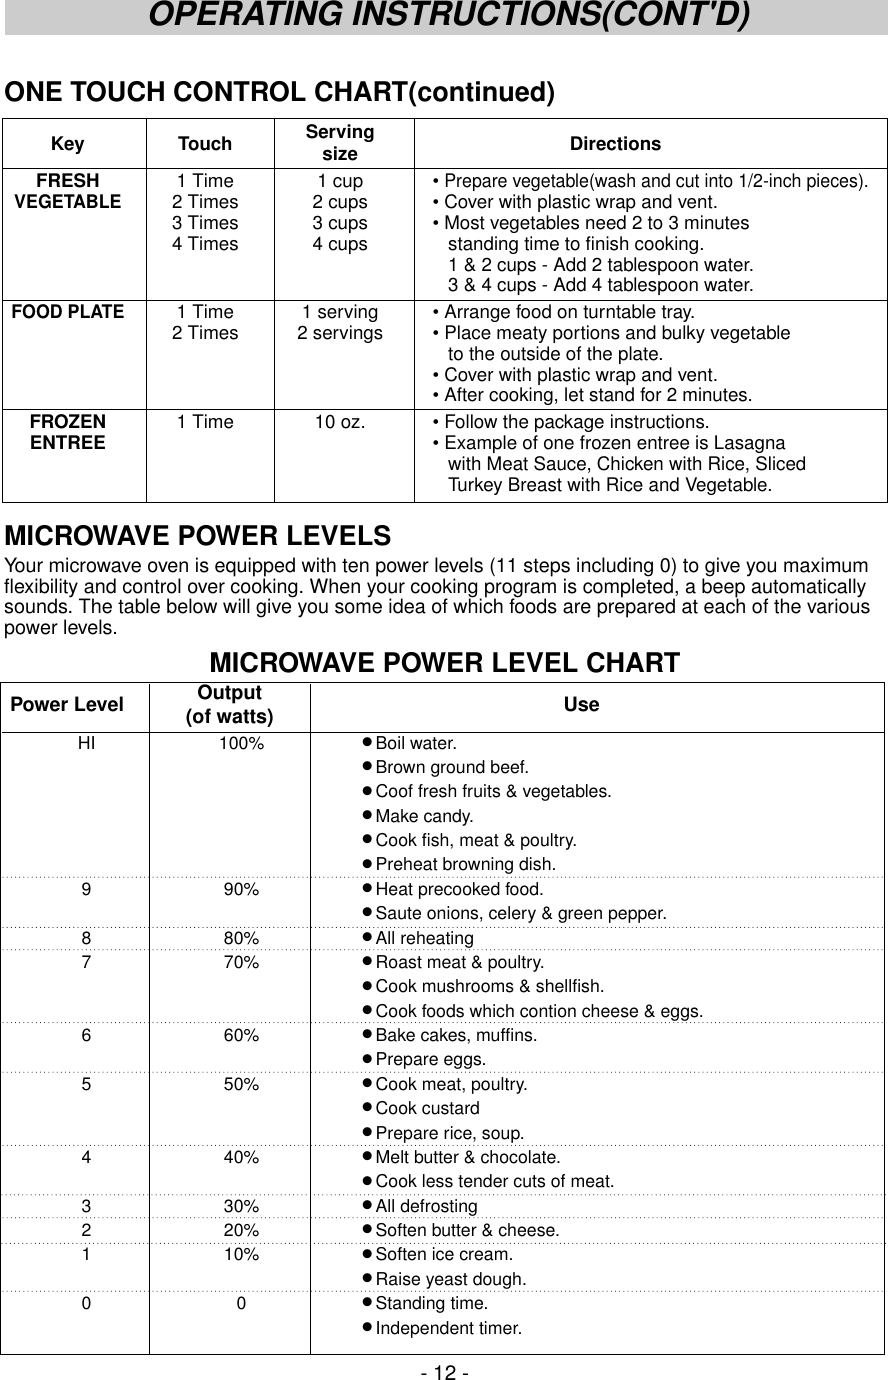 ONE TOUCH CONTROL CHART(continued)MICROWAVE POWER LEVELSYour microwave oven is equipped with ten power levels (11 steps including 0) to give you maximumflexibility and control over cooking. When your cooking program is completed, a beep automaticallysounds. The table below will give you some idea of which foods are prepared at each of the variouspower levels.MICROWAVE POWER LEVEL CHART- 12 -OPERATING INSTRUCTIONS(CONT&apos;D)Power Level UseHI 100% ● Boil water.● Brown ground beef.● Coof fresh fruits &amp; vegetables.● Make candy.● Cook fish, meat &amp; poultry.● Preheat browning dish.9 90% ● Heat precooked food.● Saute onions, celery &amp; green pepper.8 80% ● All reheating7 70% ● Roast meat &amp; poultry.● Cook mushrooms &amp; shellfish.● Cook foods which contion cheese &amp; eggs.6 60% ● Bake cakes, muffins.● Prepare eggs.5 50% ● Cook meat, poultry.● Cook custard● Prepare rice, soup.4 40% ● Melt butter &amp; chocolate.● Cook less tender cuts of meat.3 30% ● All defrosting2 20% ● Soften butter &amp; cheese.1 10% ● Soften ice cream.● Raise yeast dough.00● Standing time.● Independent timer.Output (of watts)Key Touch Serving  DirectionssizeFRESH 1 Time 1 cup • Prepare vegetable(wash and cut into 1/2-inch pieces).VEGETABLE2 Times 2 cups • Cover with plastic wrap and vent.3 Times 3 cups • Most vegetables need 2 to 3 minutes4 Times 4 cups standing time to finish cooking.1 &amp; 2 cups - Add 2 tablespoon water.3 &amp; 4 cups - Add 4 tablespoon water.FOOD PLATE1 Time 1 serving • Arrange food on turntable tray.2 Times 2 servings  • Place meaty portions and bulky vegetableto the outside of the plate.• Cover with plastic wrap and vent.• After cooking, let stand for 2 minutes.FROZEN 1 Time 10 oz. • Follow the package instructions.ENTREE • Example of one frozen entree is Lasagnawith Meat Sauce, Chicken with Rice, SlicedTurkey Breast with Rice and Vegetable.